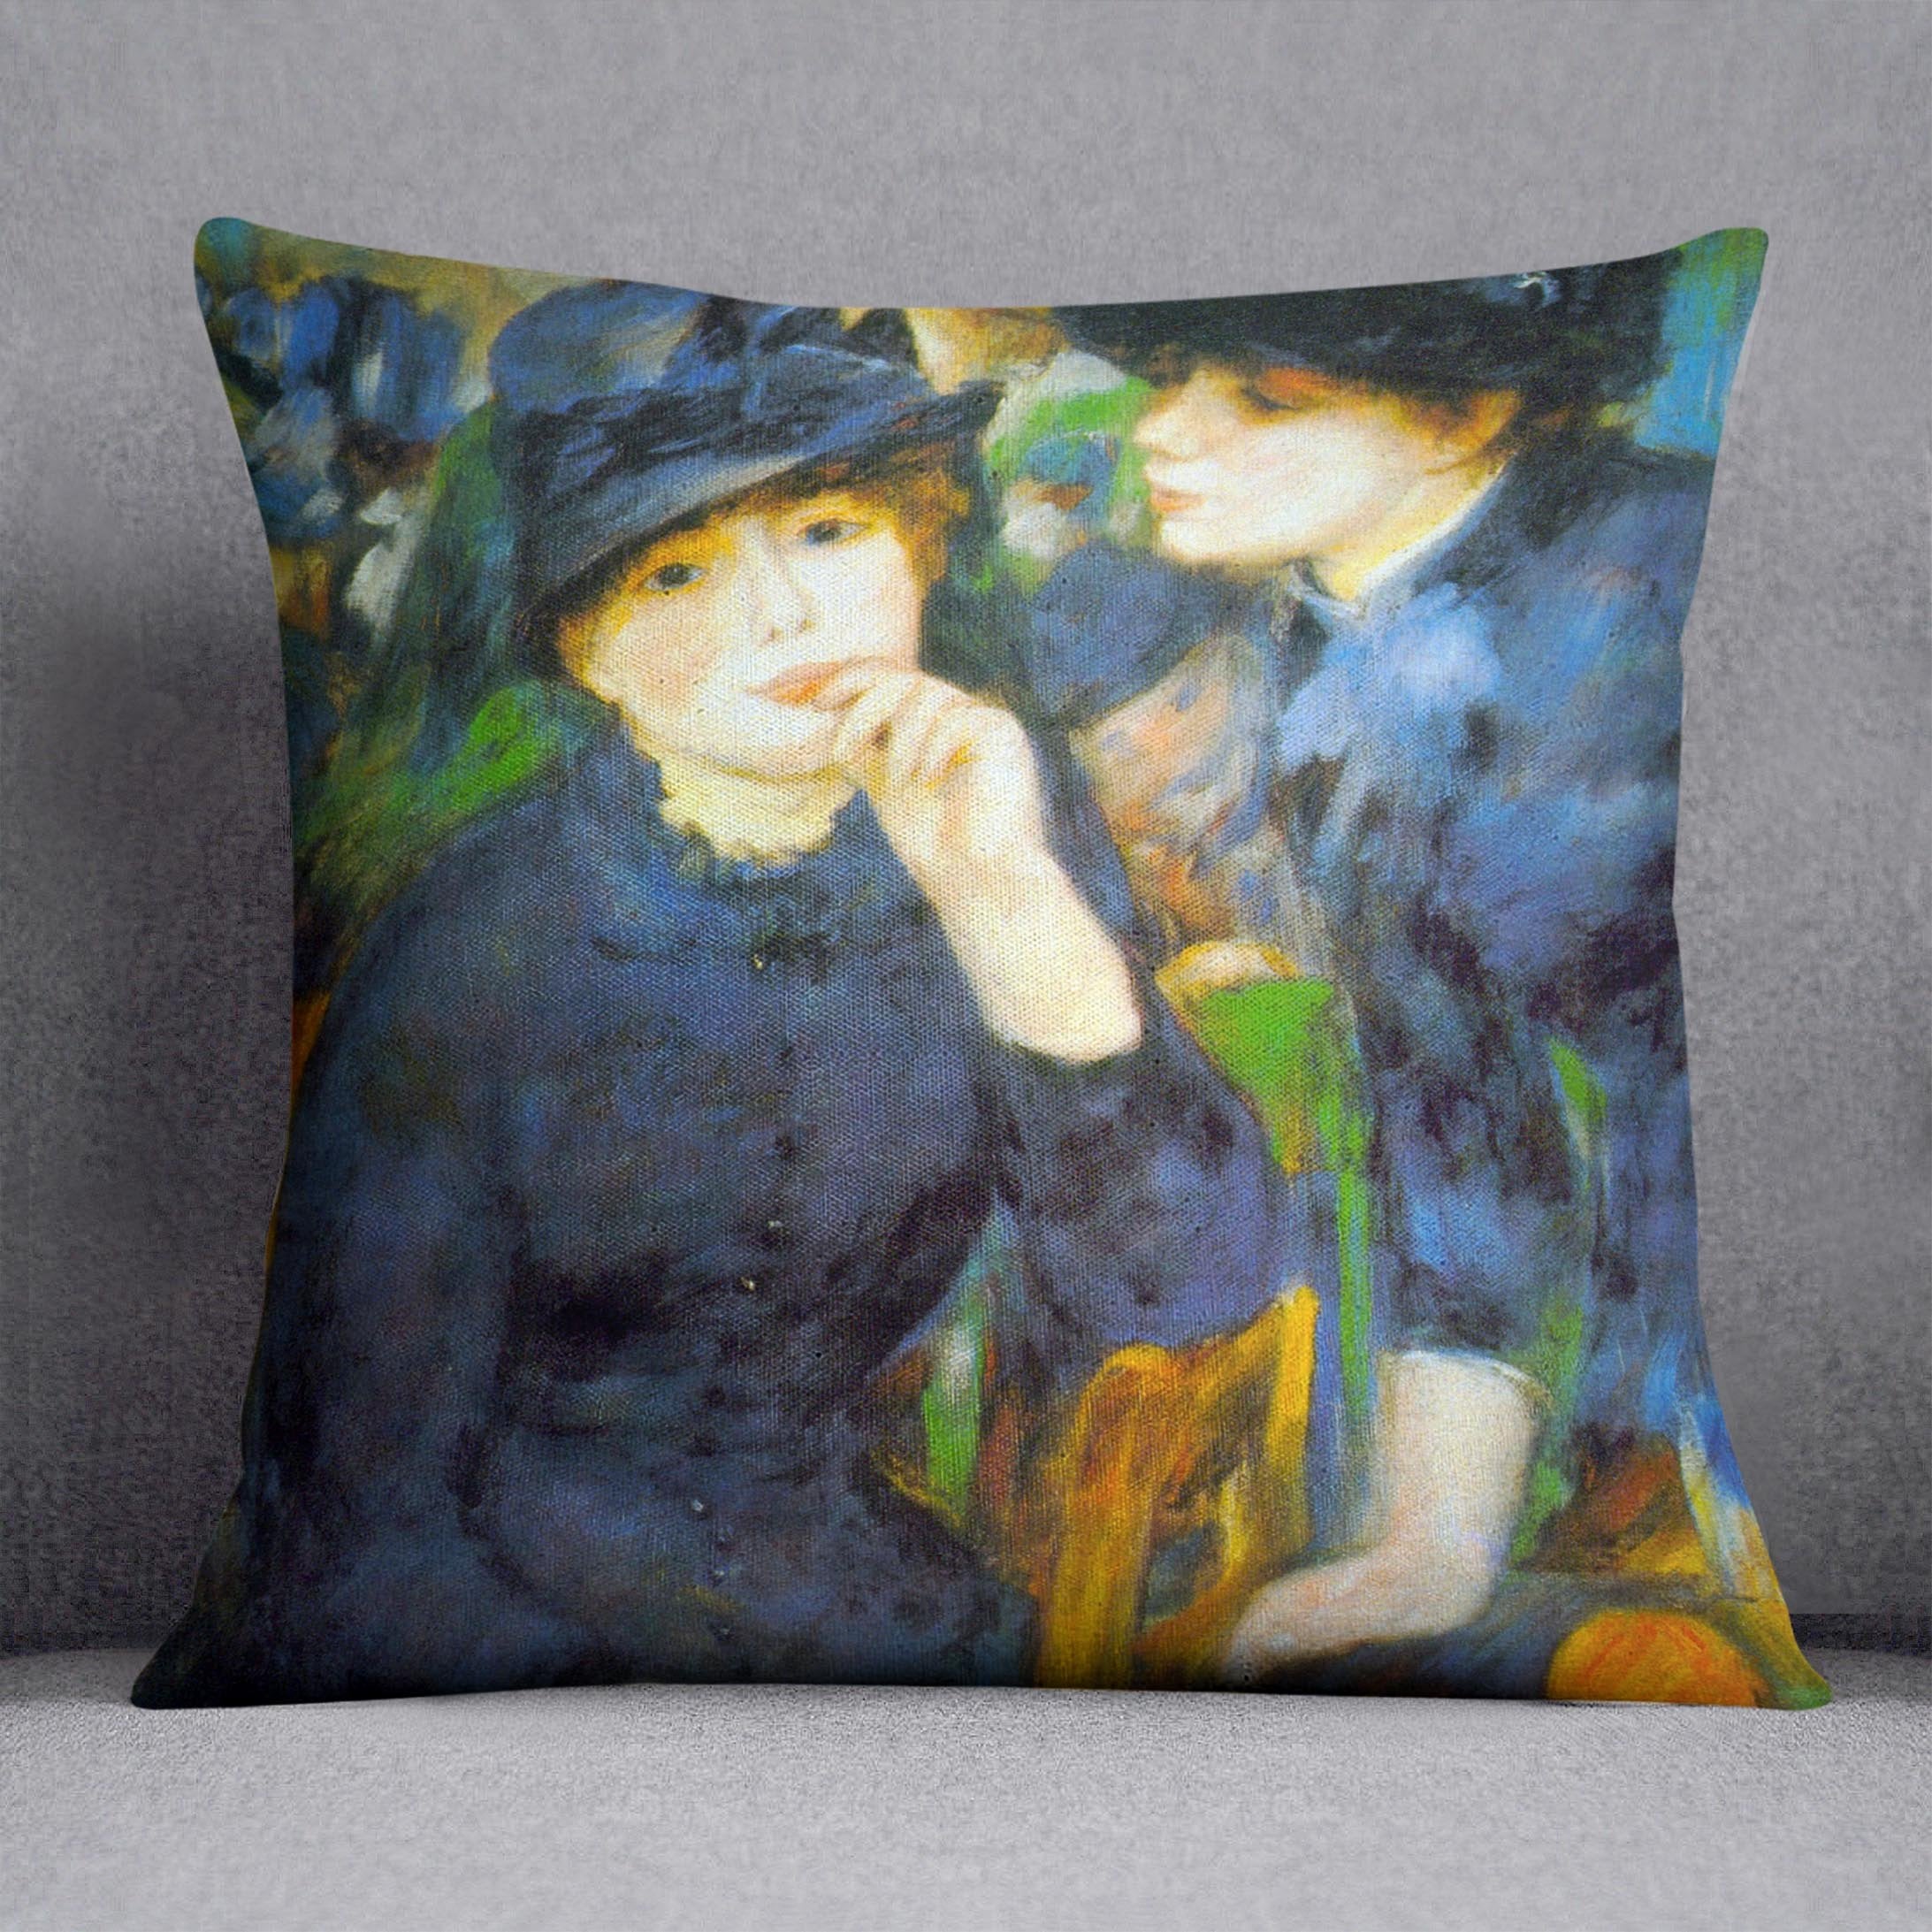 Two Girls by Renoir Throw Pillow